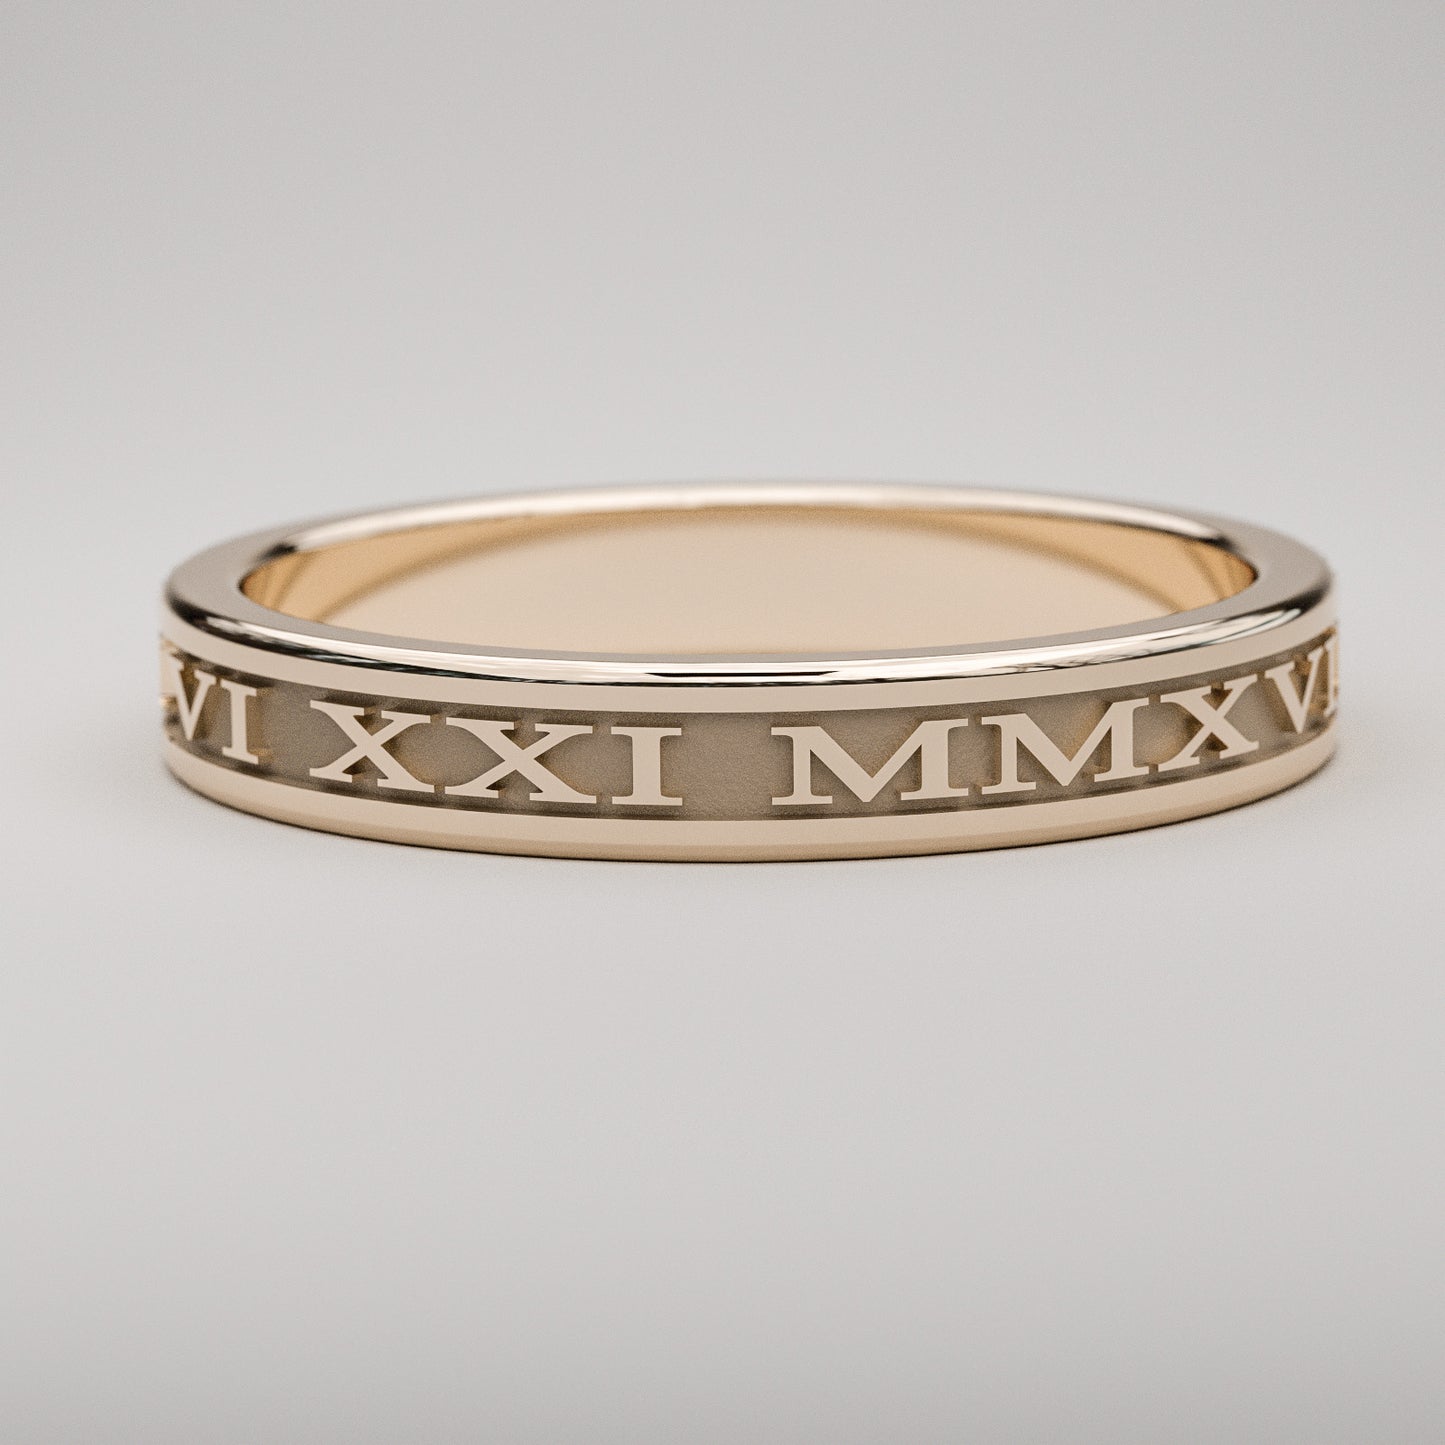 Custom date Roman Numeral ring in solid rose gold, 3mm wide